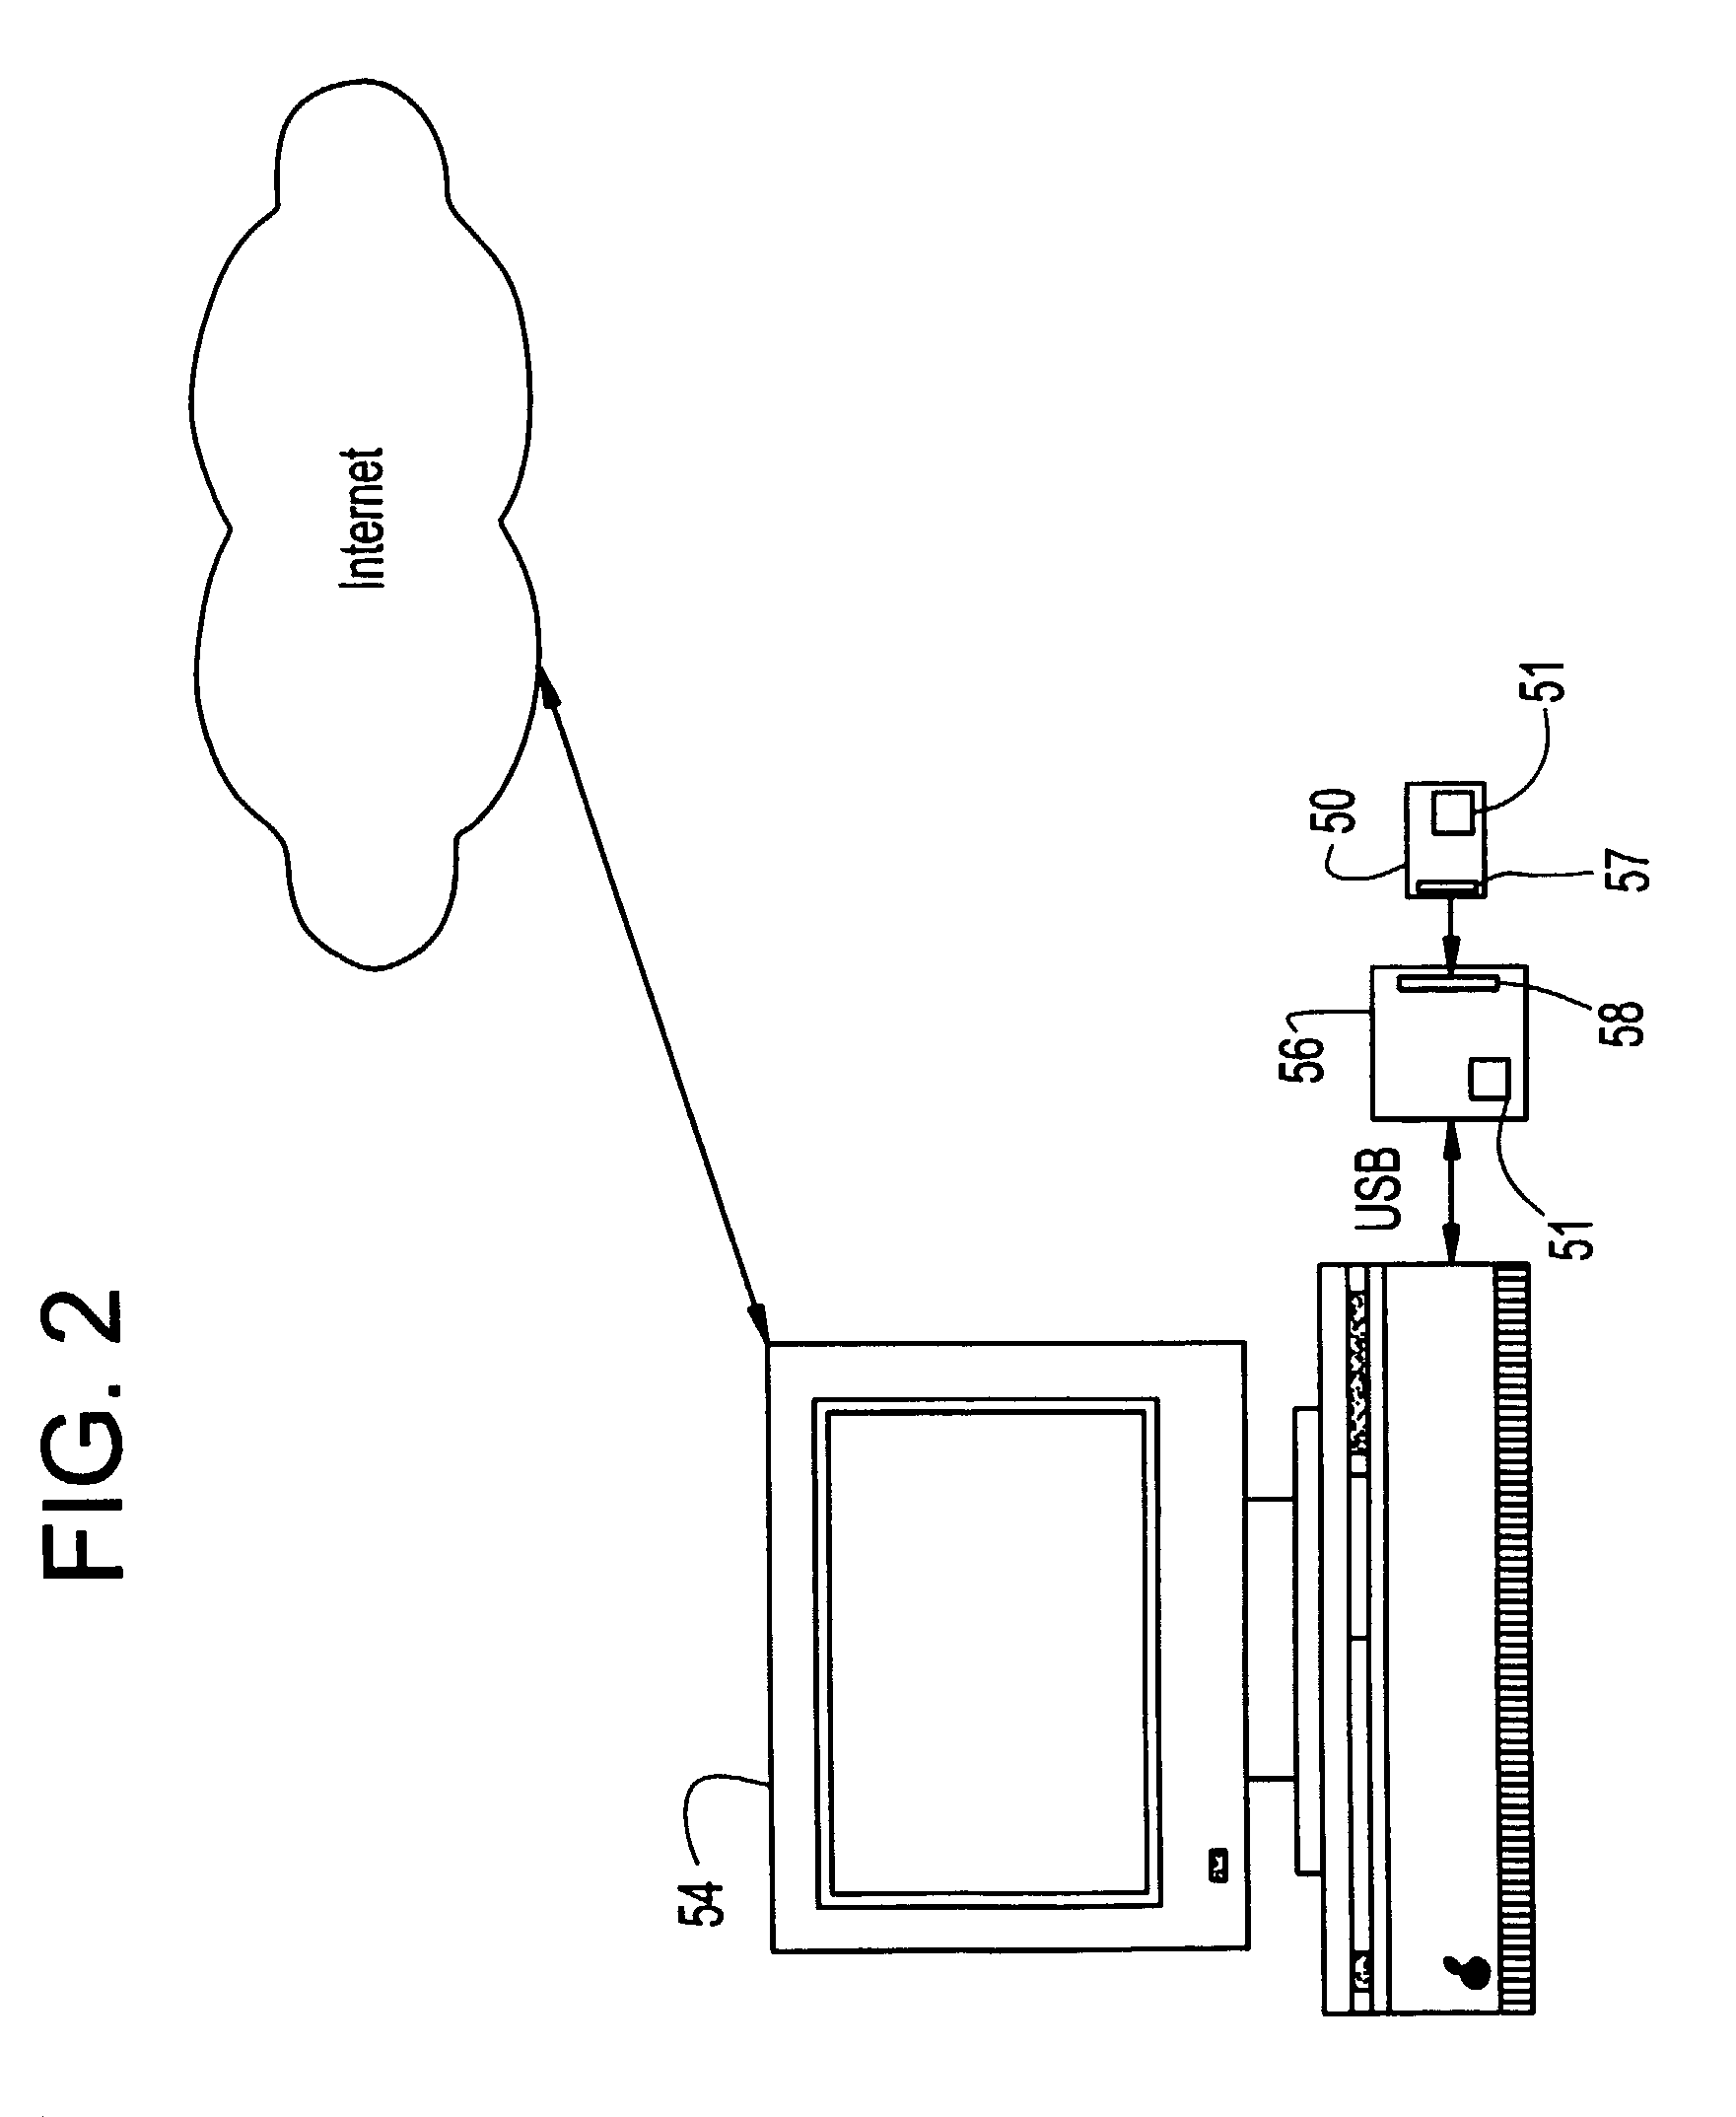 Method of using personal device with internal biometric in conducting transactions over a network